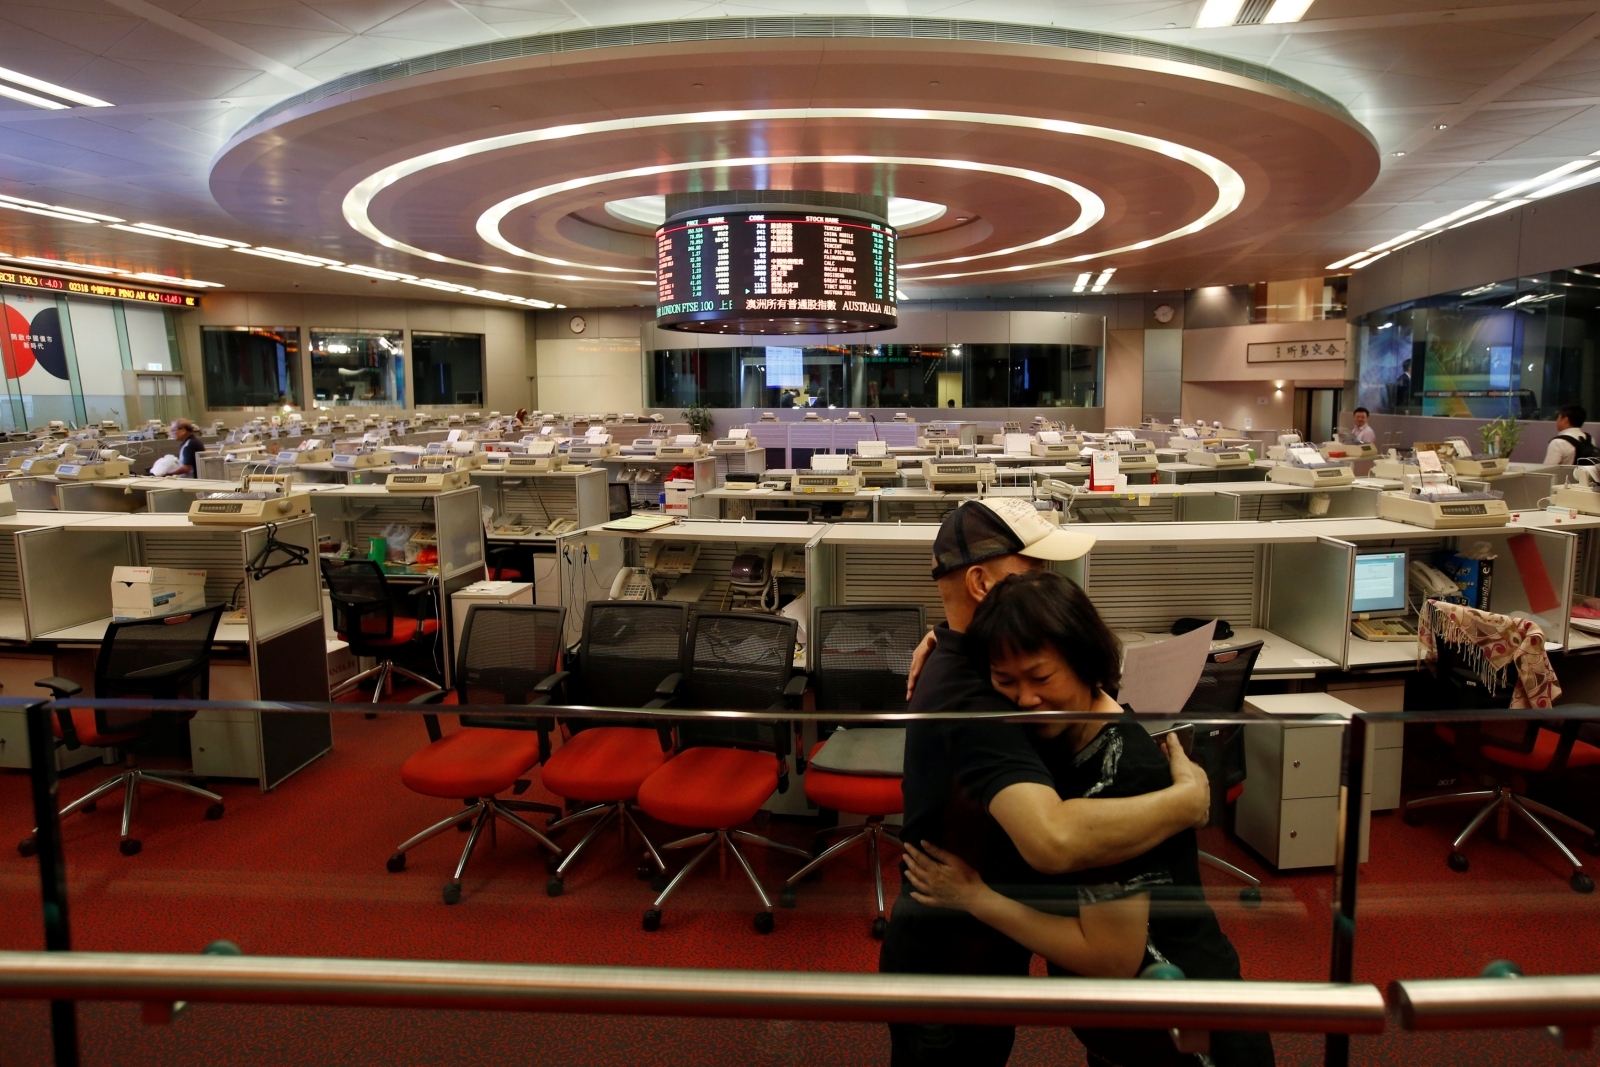 End of an era in Hong Kong as stock exchange shuts up shop after 31 years